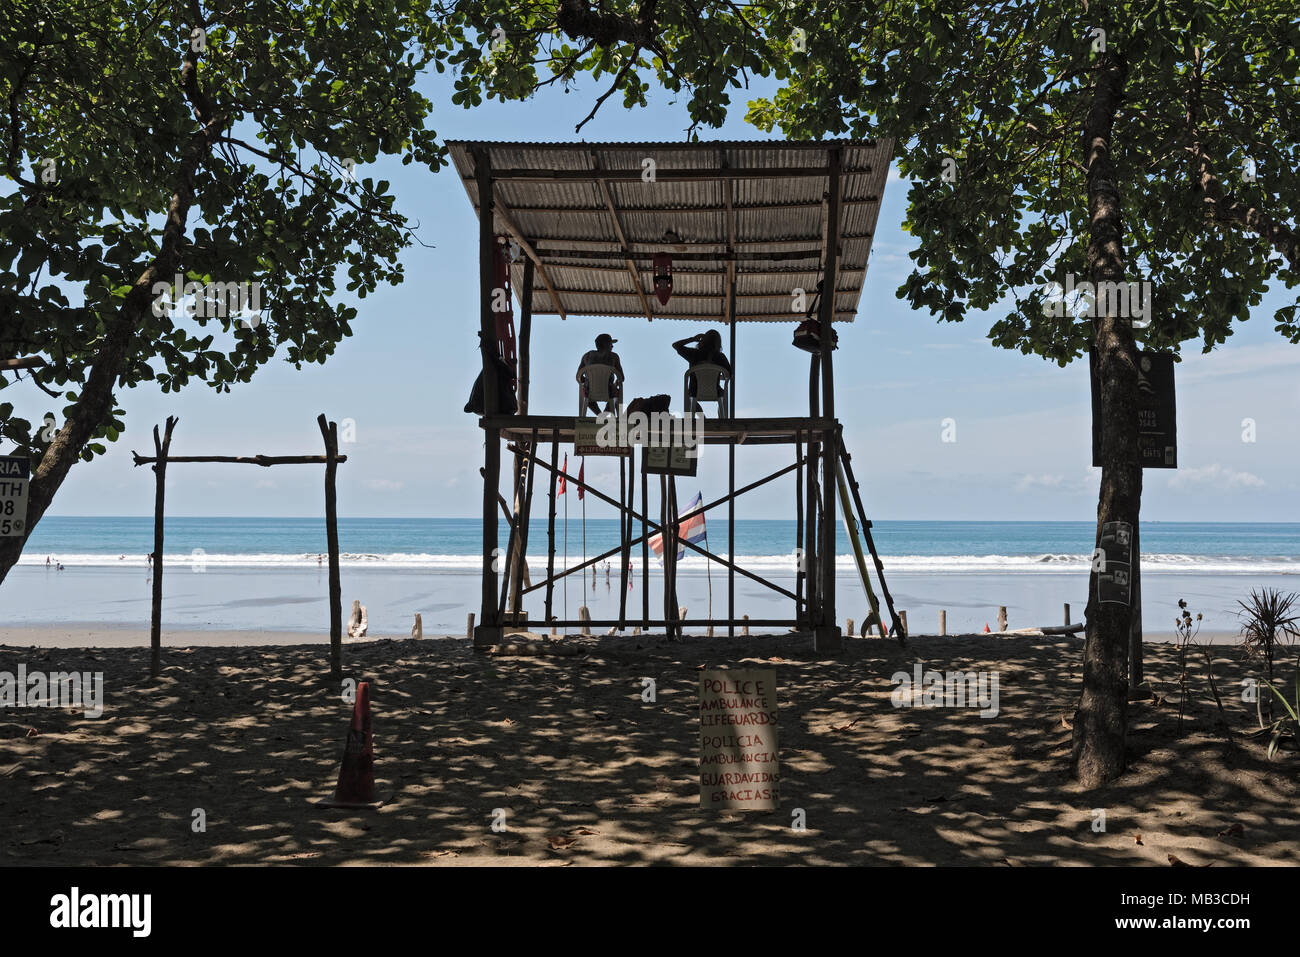 lifeguard station at a beach of the Pacific Ocean south of Puntarenas, Costa Rica Stock Photo